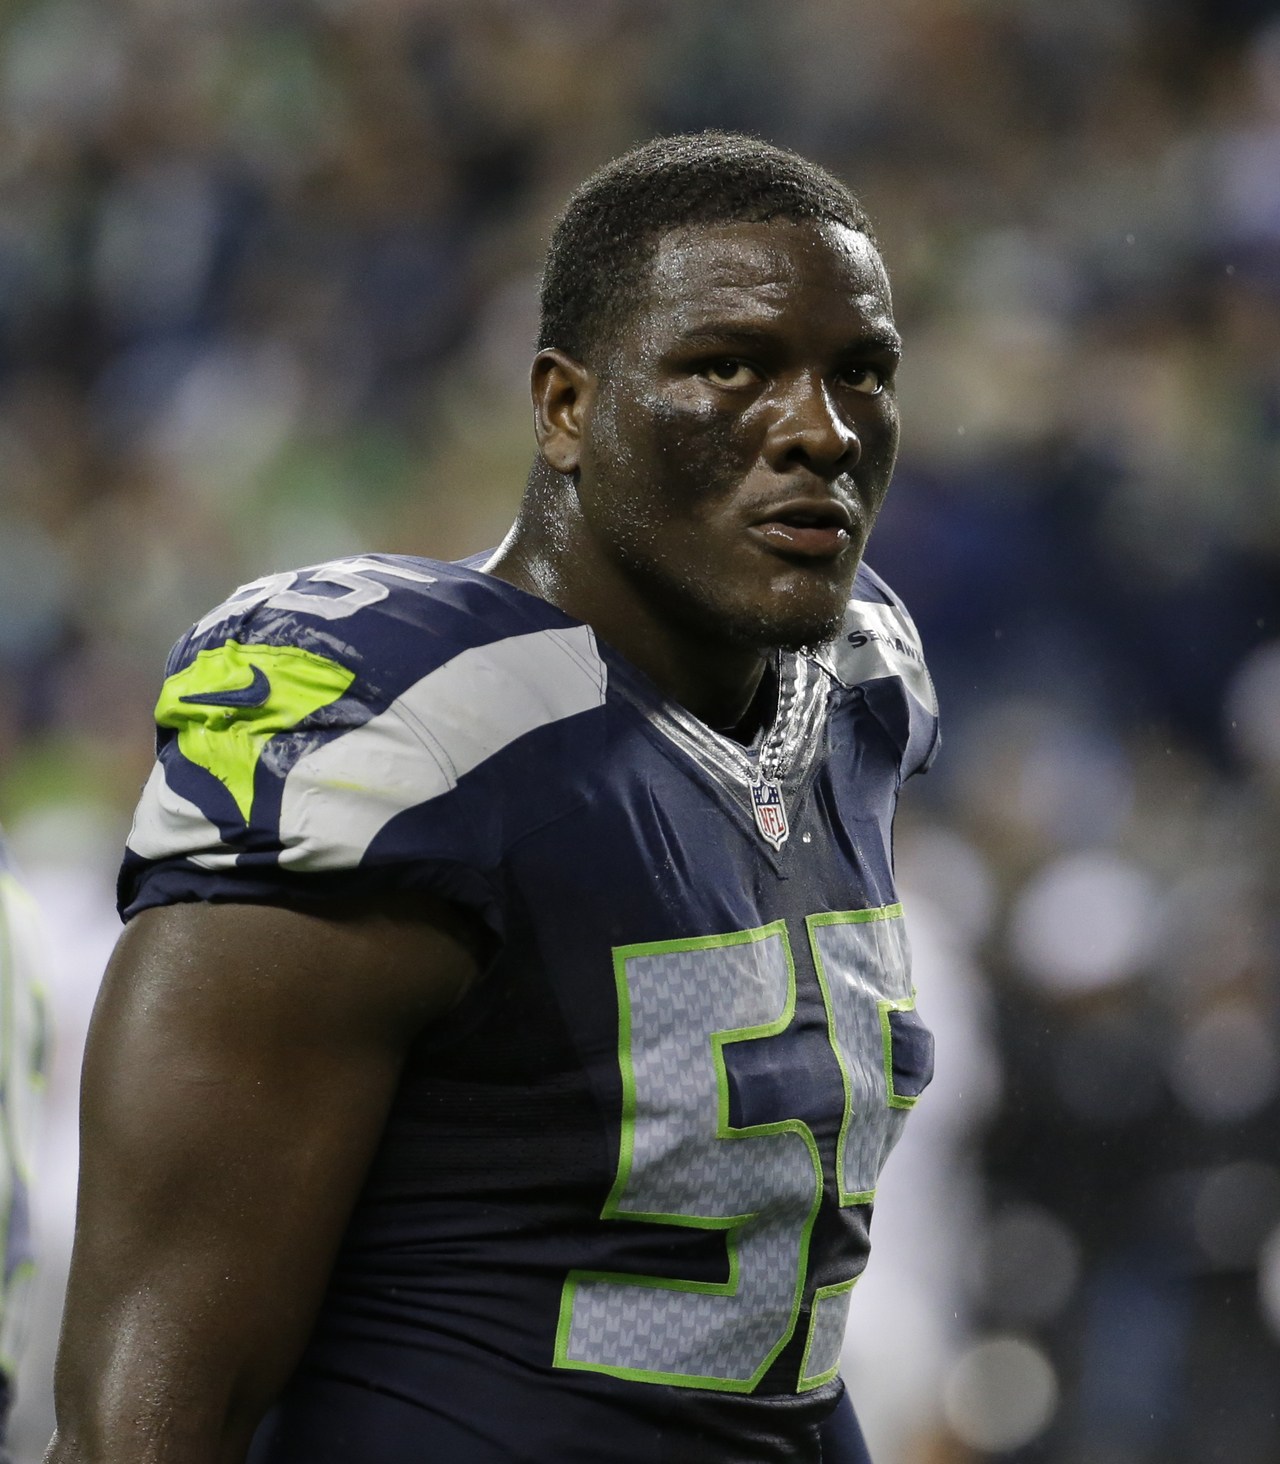 Defensive end Frank Clark, who the Seahawks selected in the second round of last year’s draft, was a controversial pick.